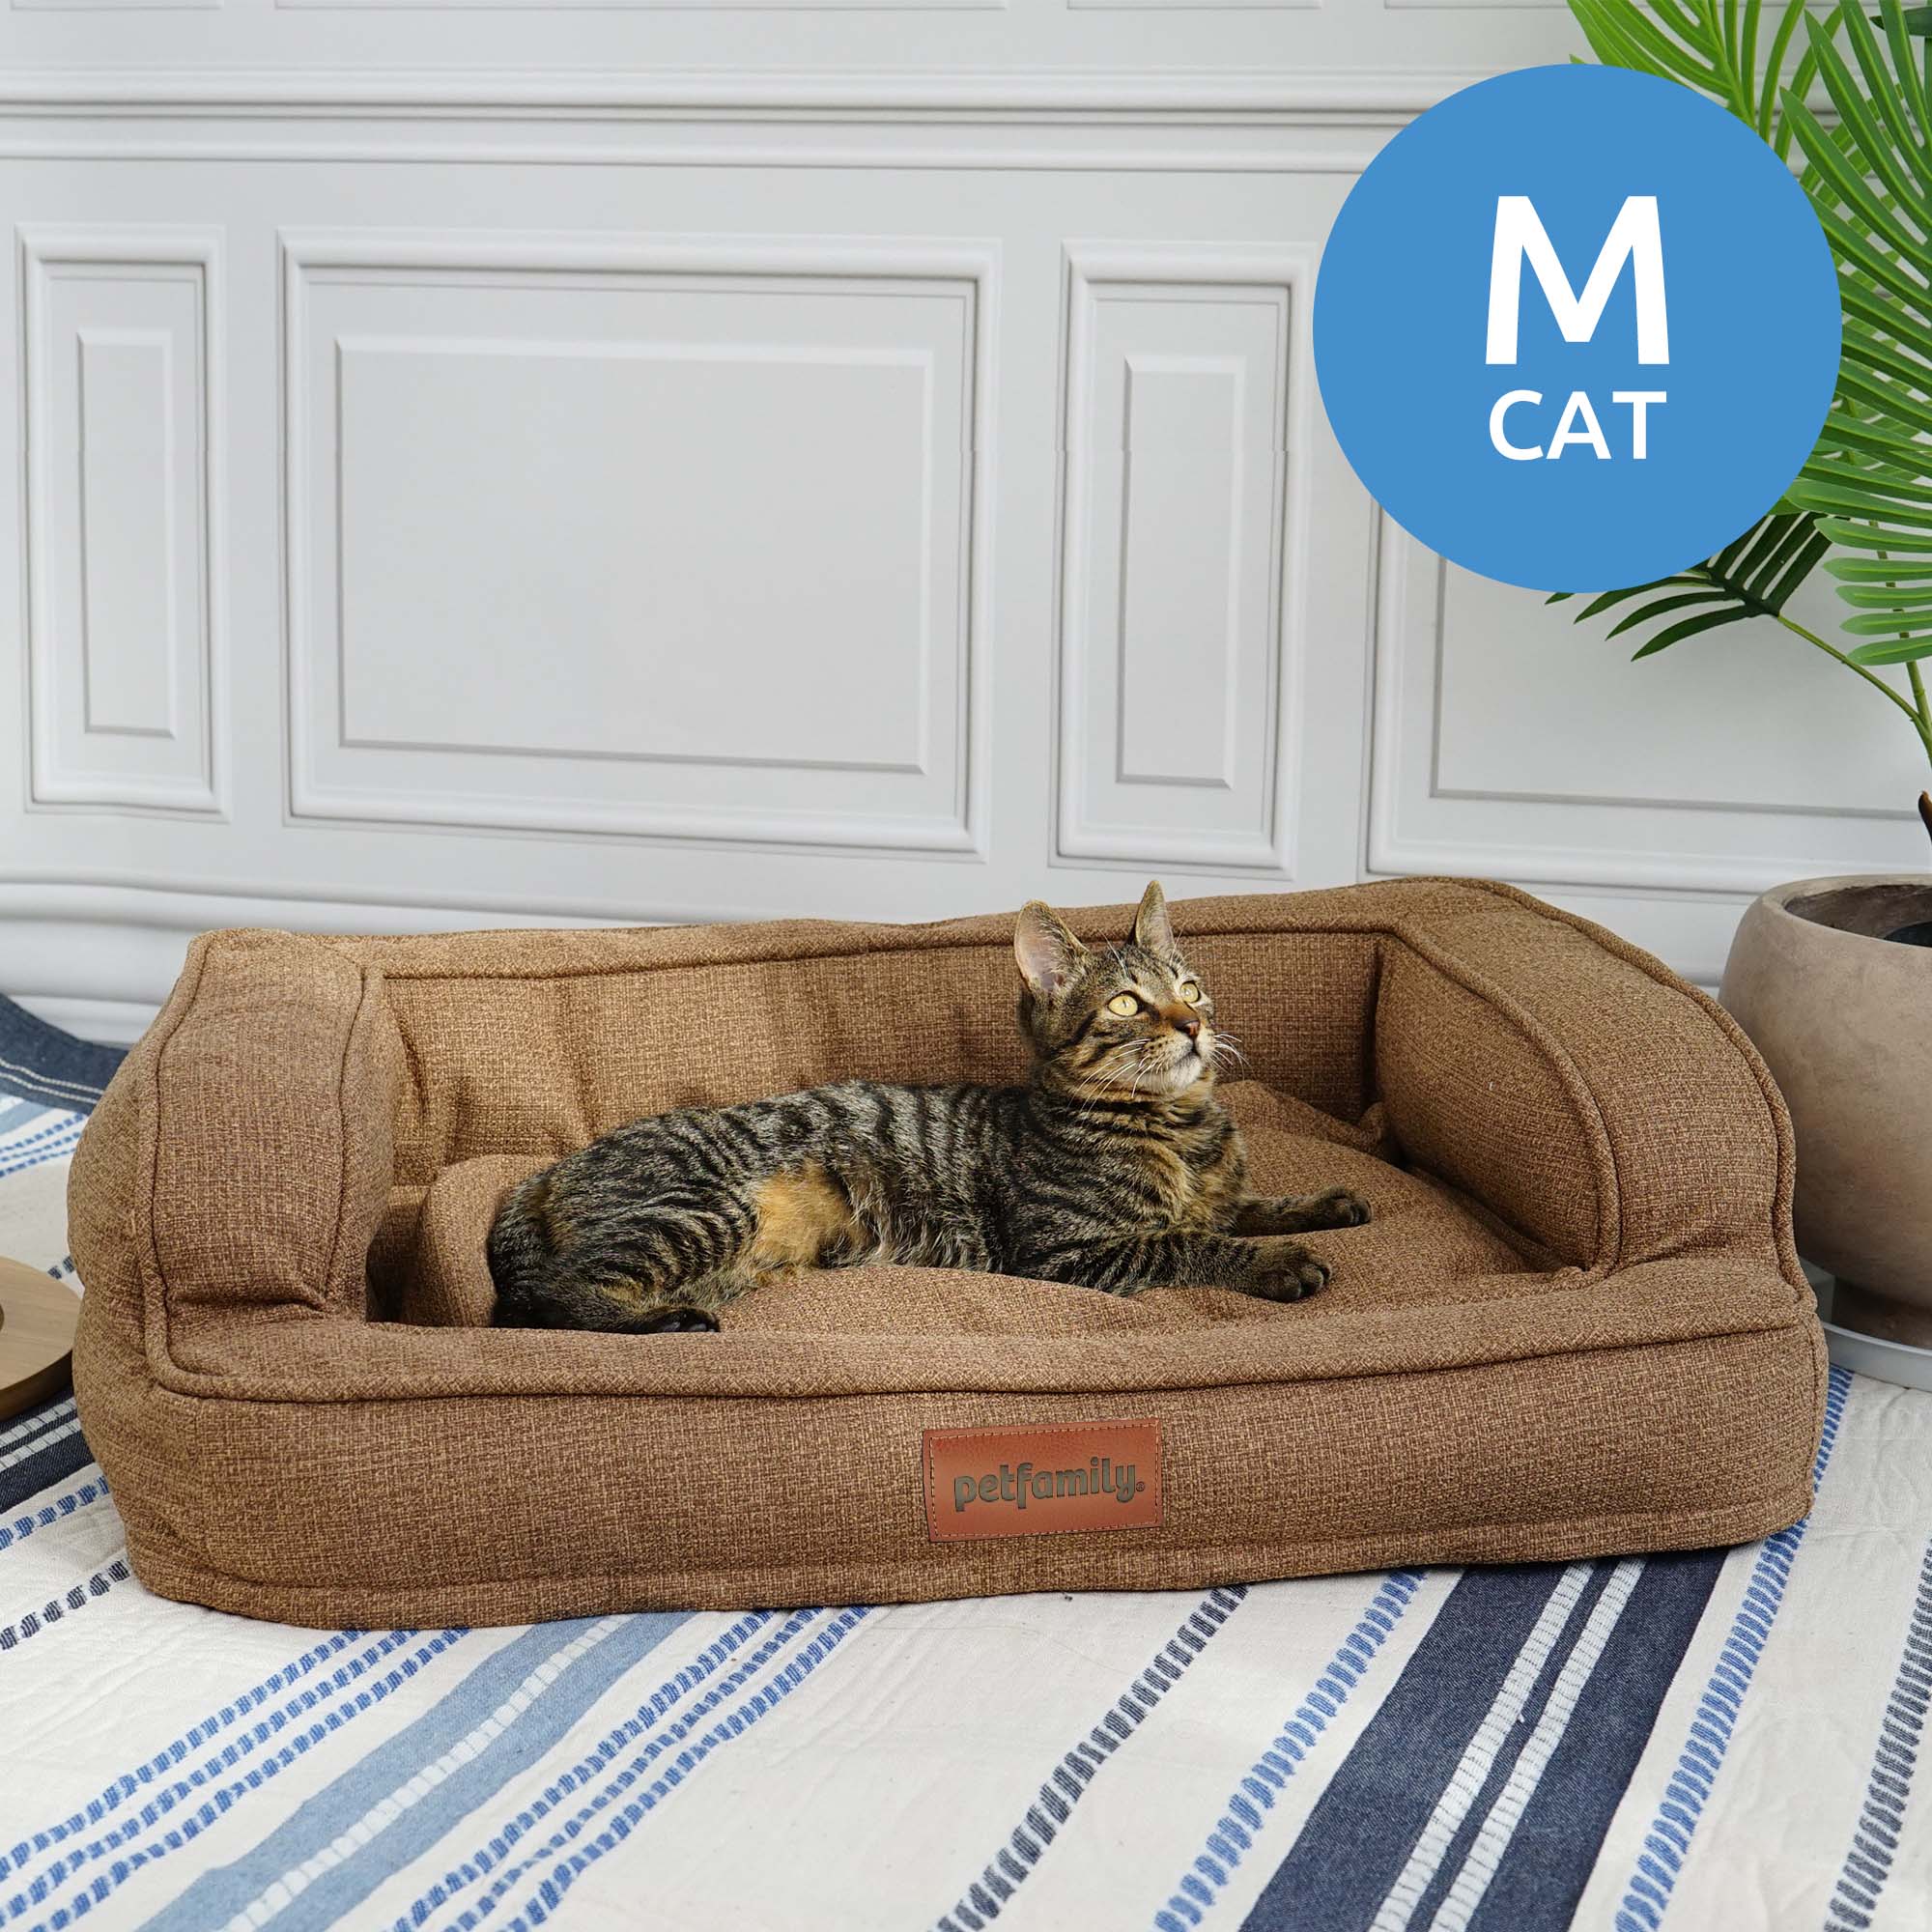 Luxury Dog Bed Cat Bed Pet Bed, Brown